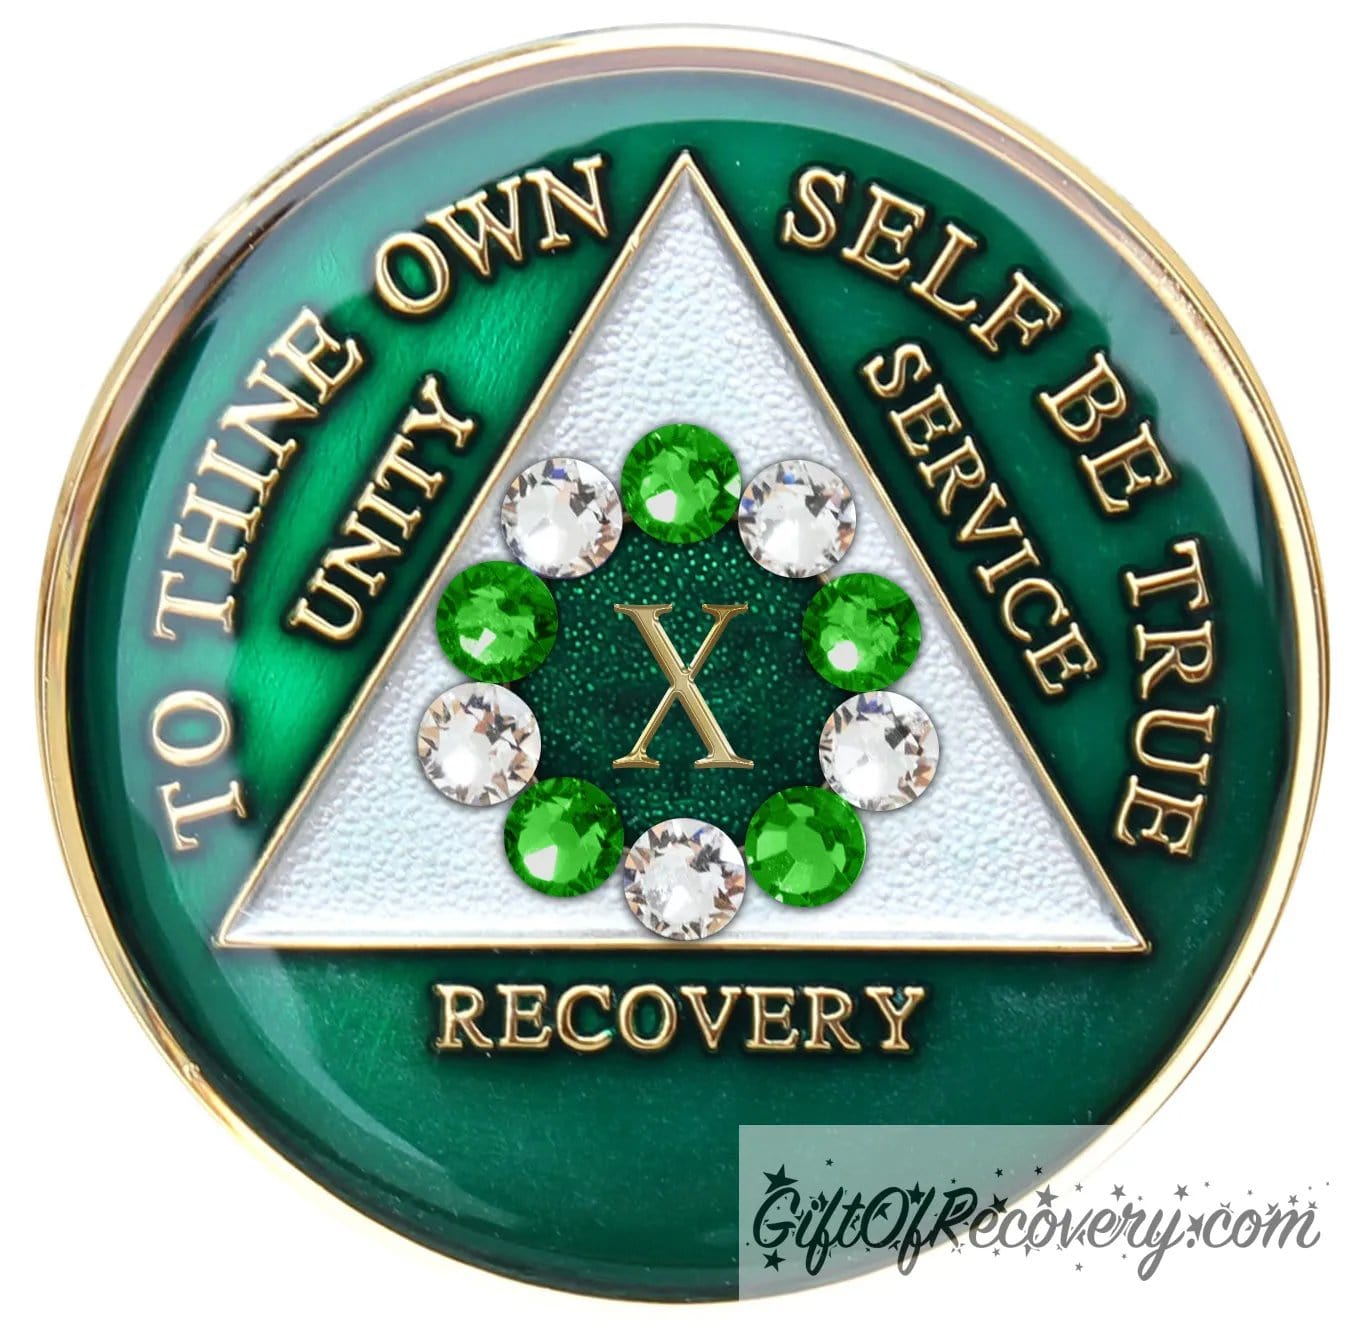 10 year emerald green AA medallion with the 10th step in emphasis in the center, 5 emerald green genuine crystals and 5 clear genuine crystals, the triangle is pearl white, while the circle is sparkle green. To thine own self be true, unity, service, recovery, and the roman numeral 1, are 14k gold and sealed with resin for a glossy finish.